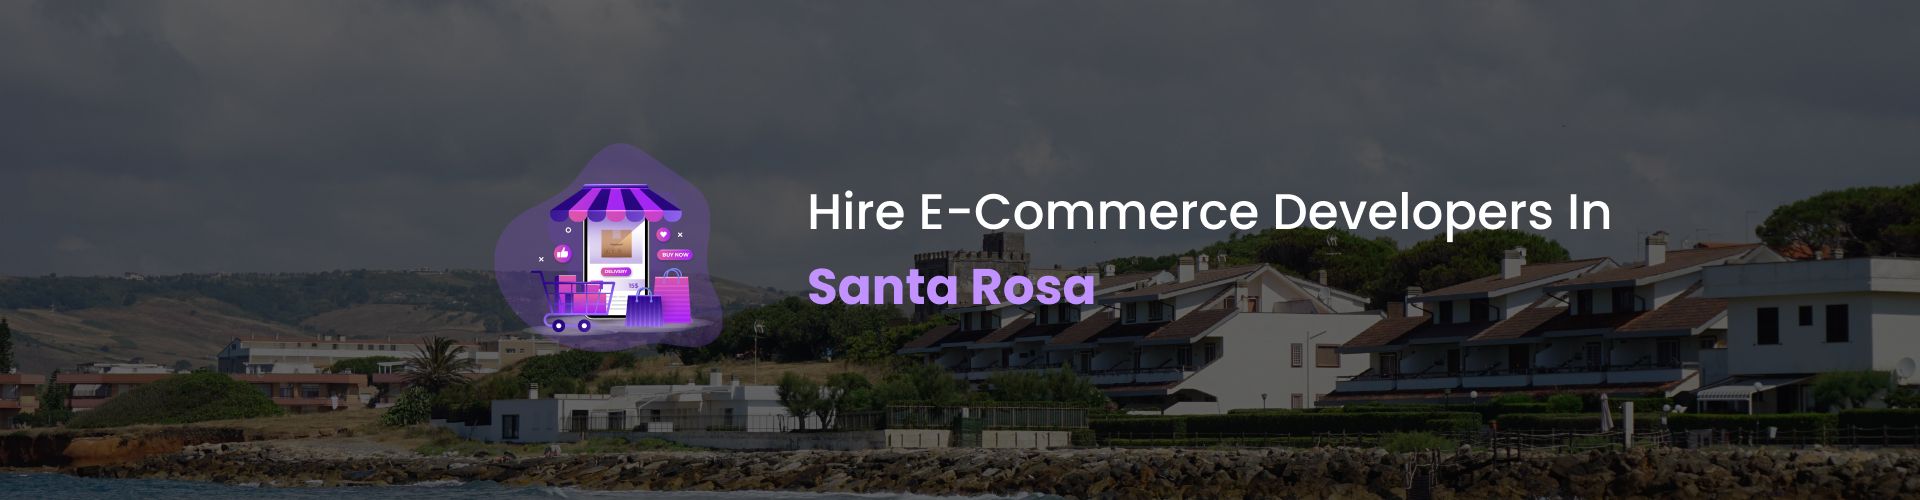 hire ecommerce developers in santa rosa